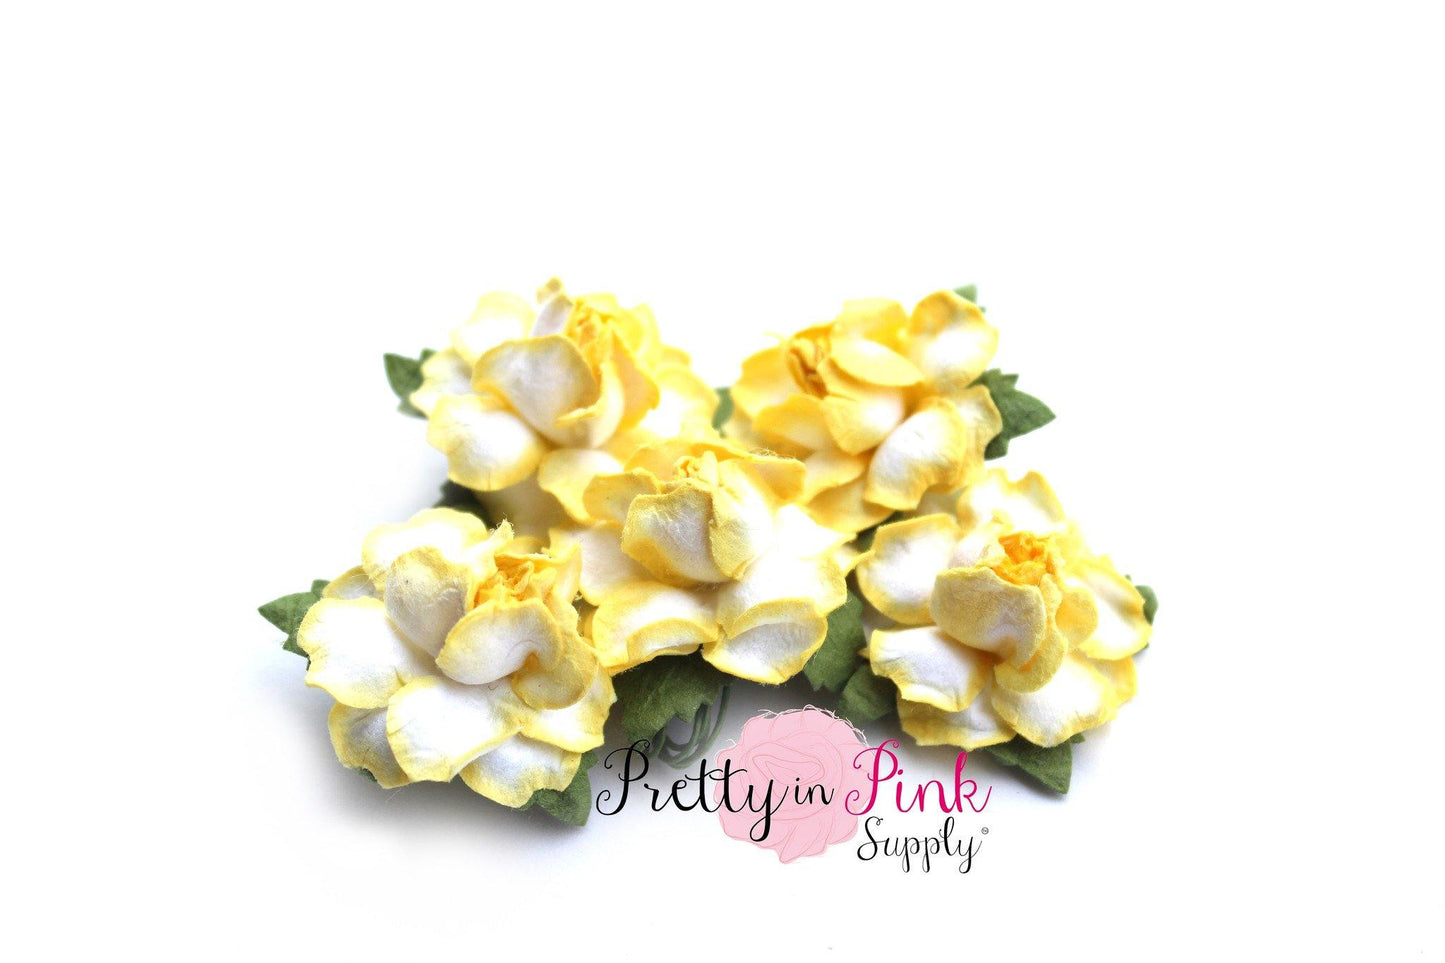 1" PREMIUM White with Yellow Tip Paper Flowers - Pretty in Pink Supply